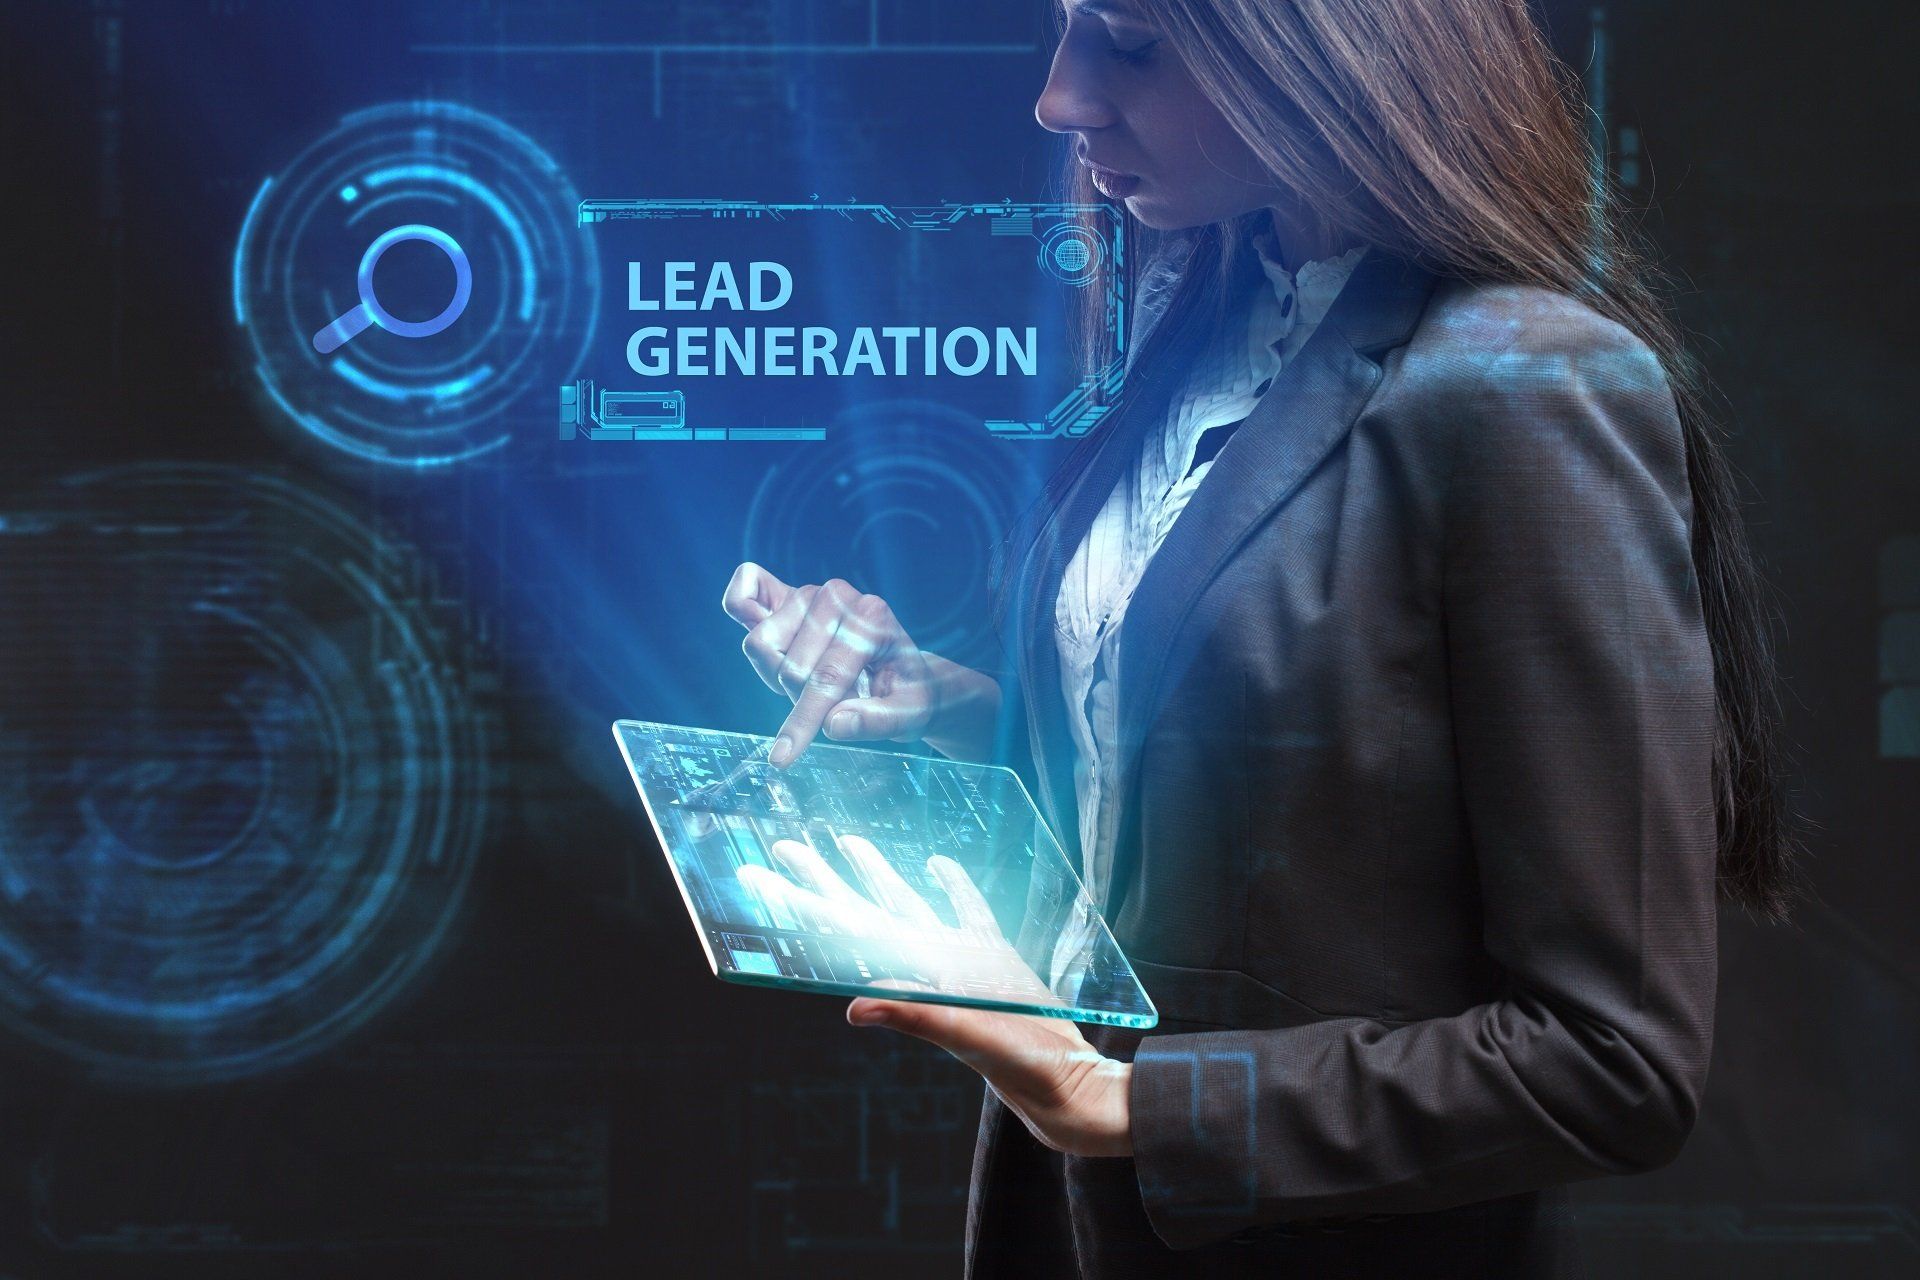 Why Is Lead Generation Important?